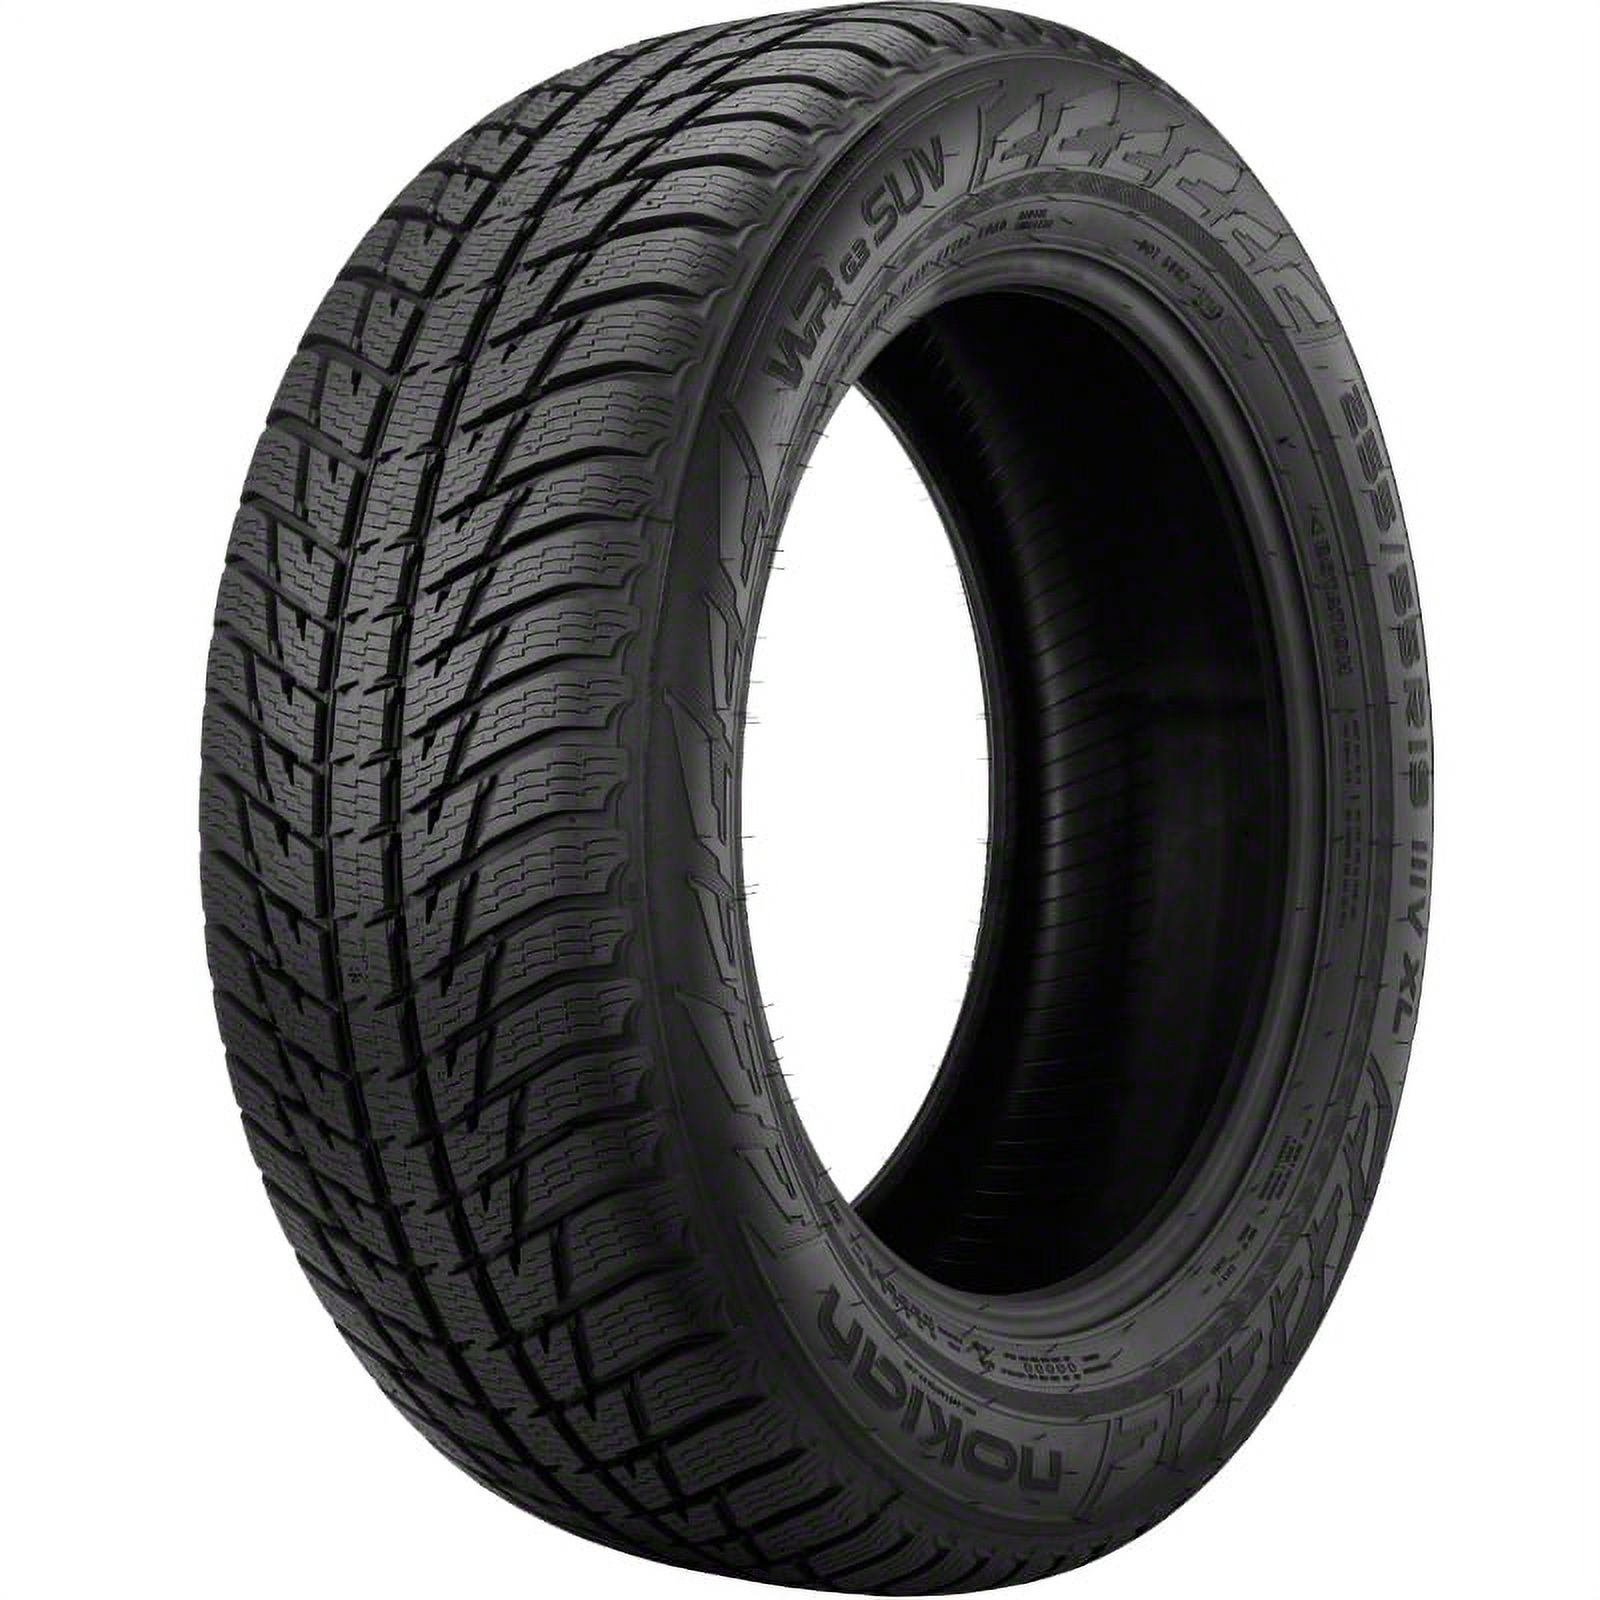 Nokian WRG3 SUV 245/55R19 103 H Tire - image 1 of 4